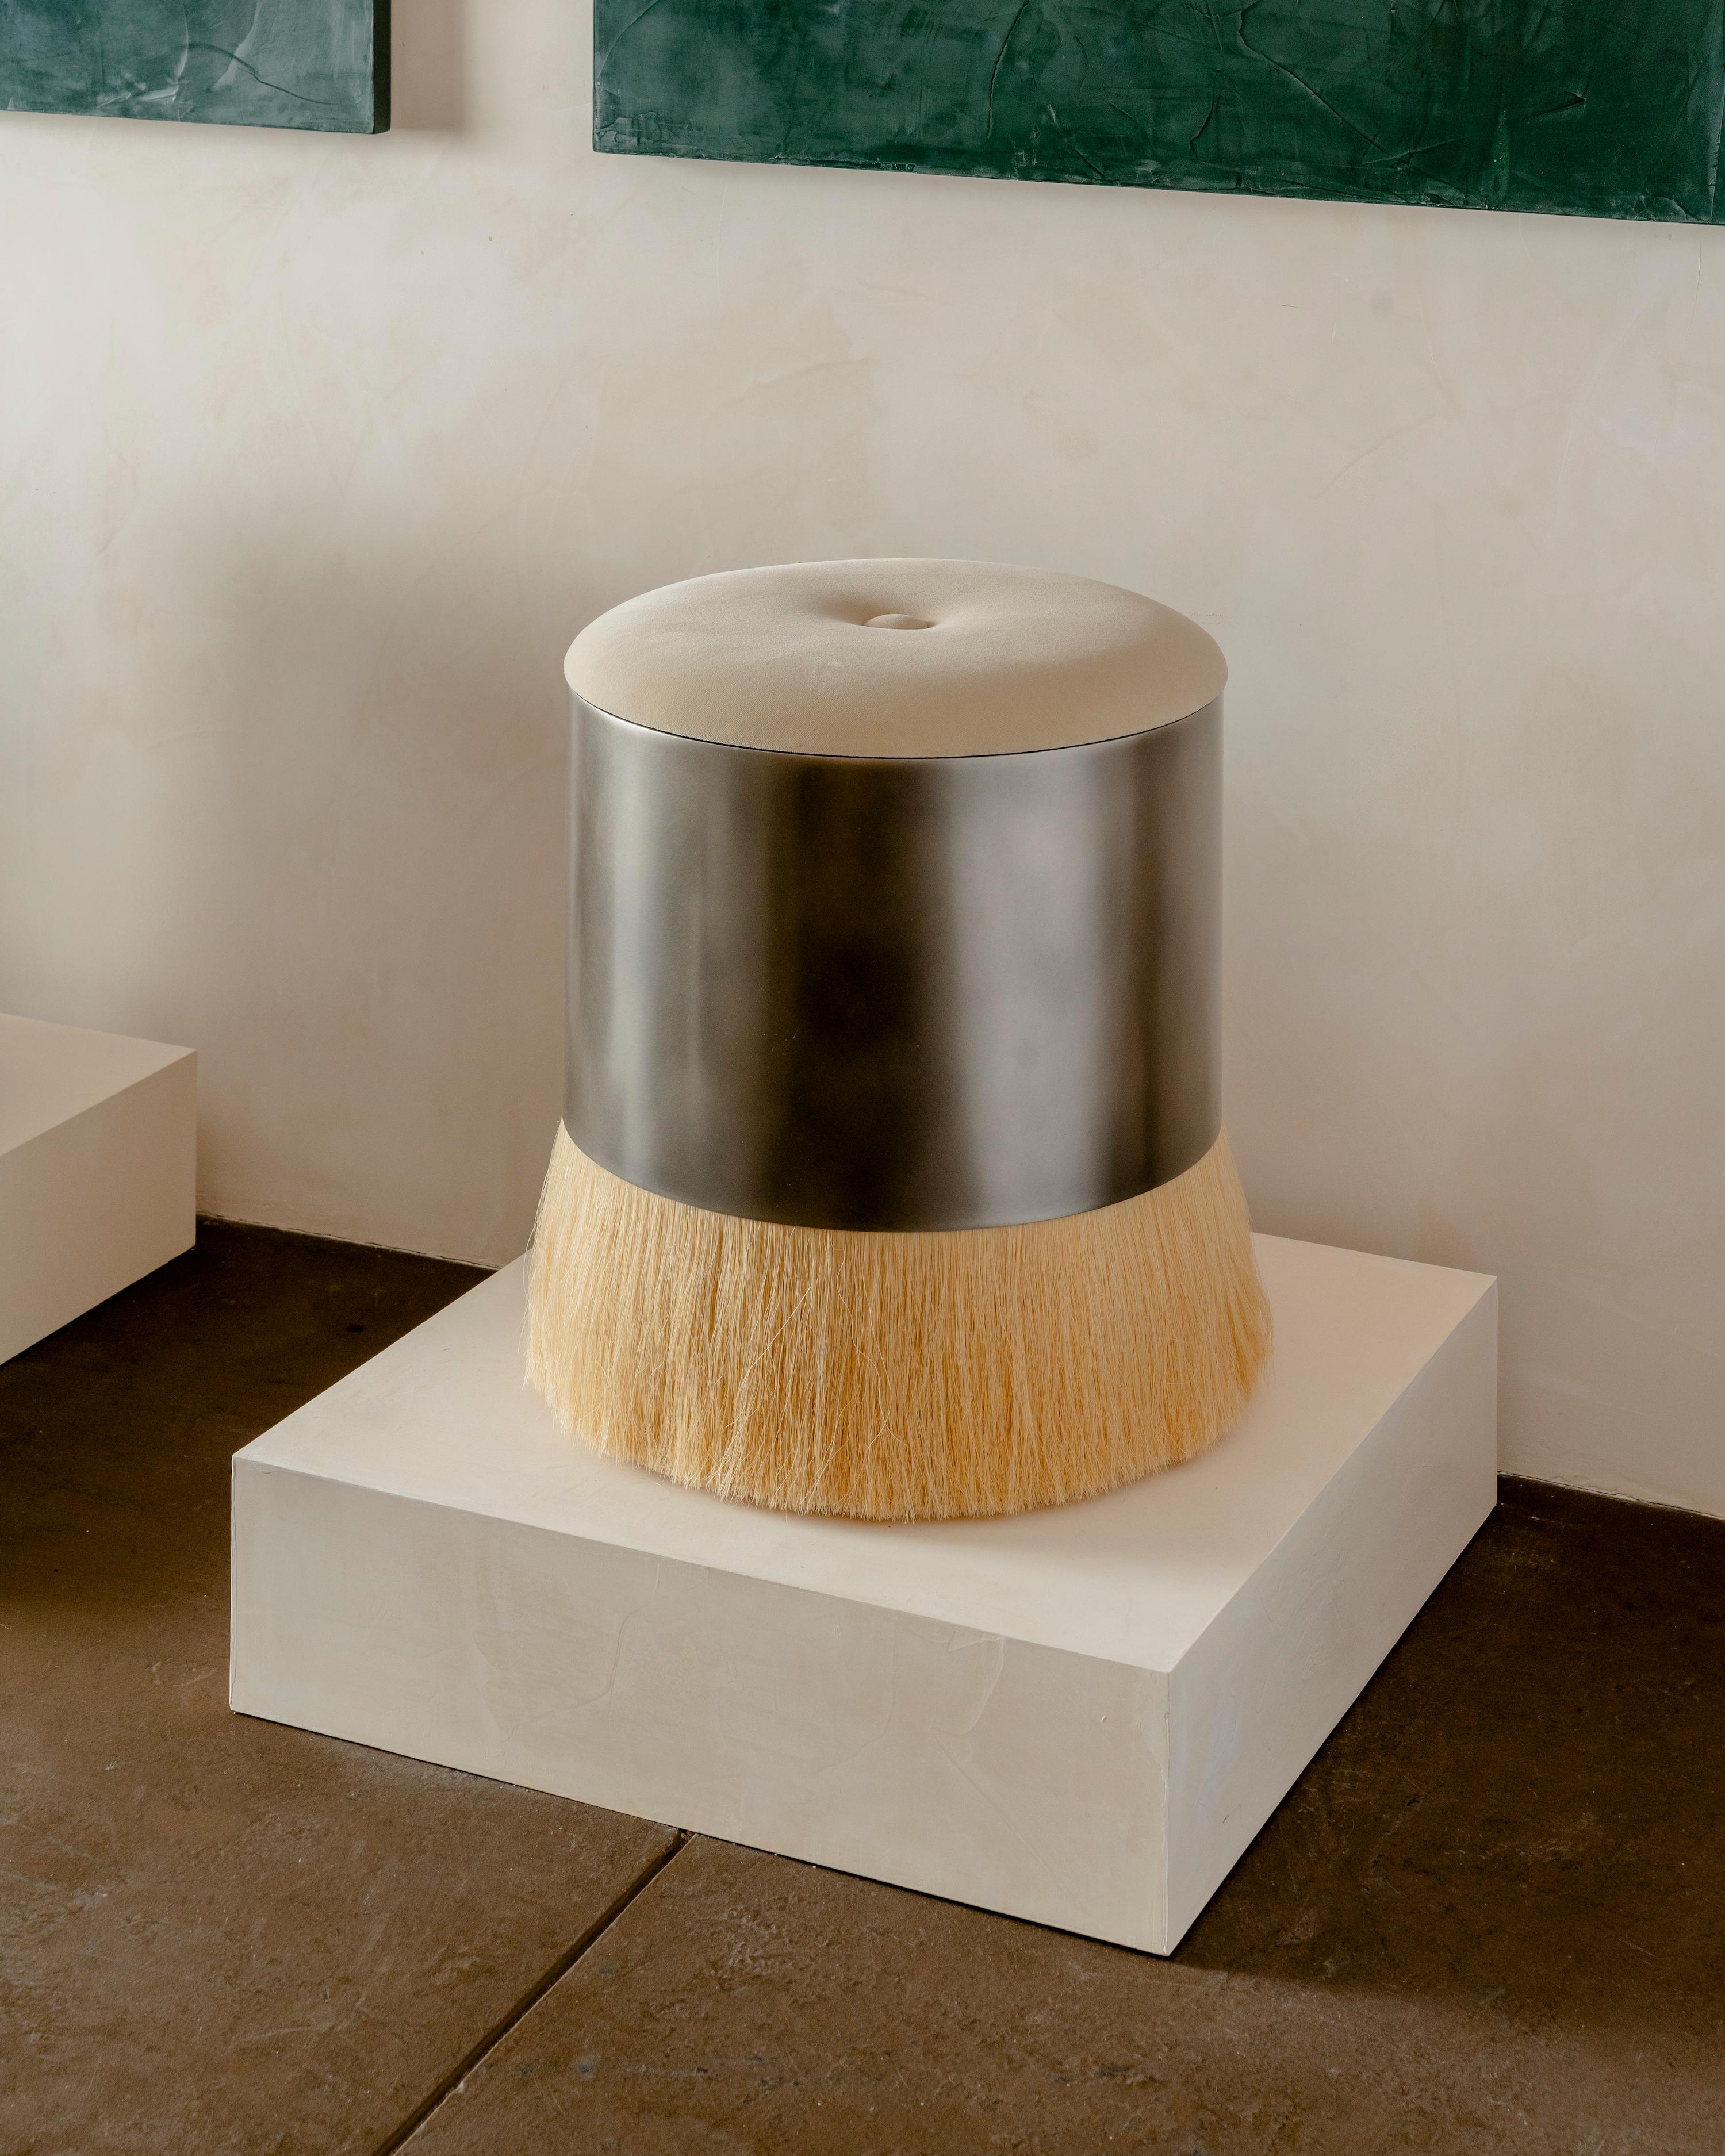 The Thing 4 features a luxuriously upholstered top, metal drum and horse hair. Refined yet wild, Konekt's signature Thing Stools are available in four different styles. 

The Thing 4 is available on a made to order basis with your choice of metal